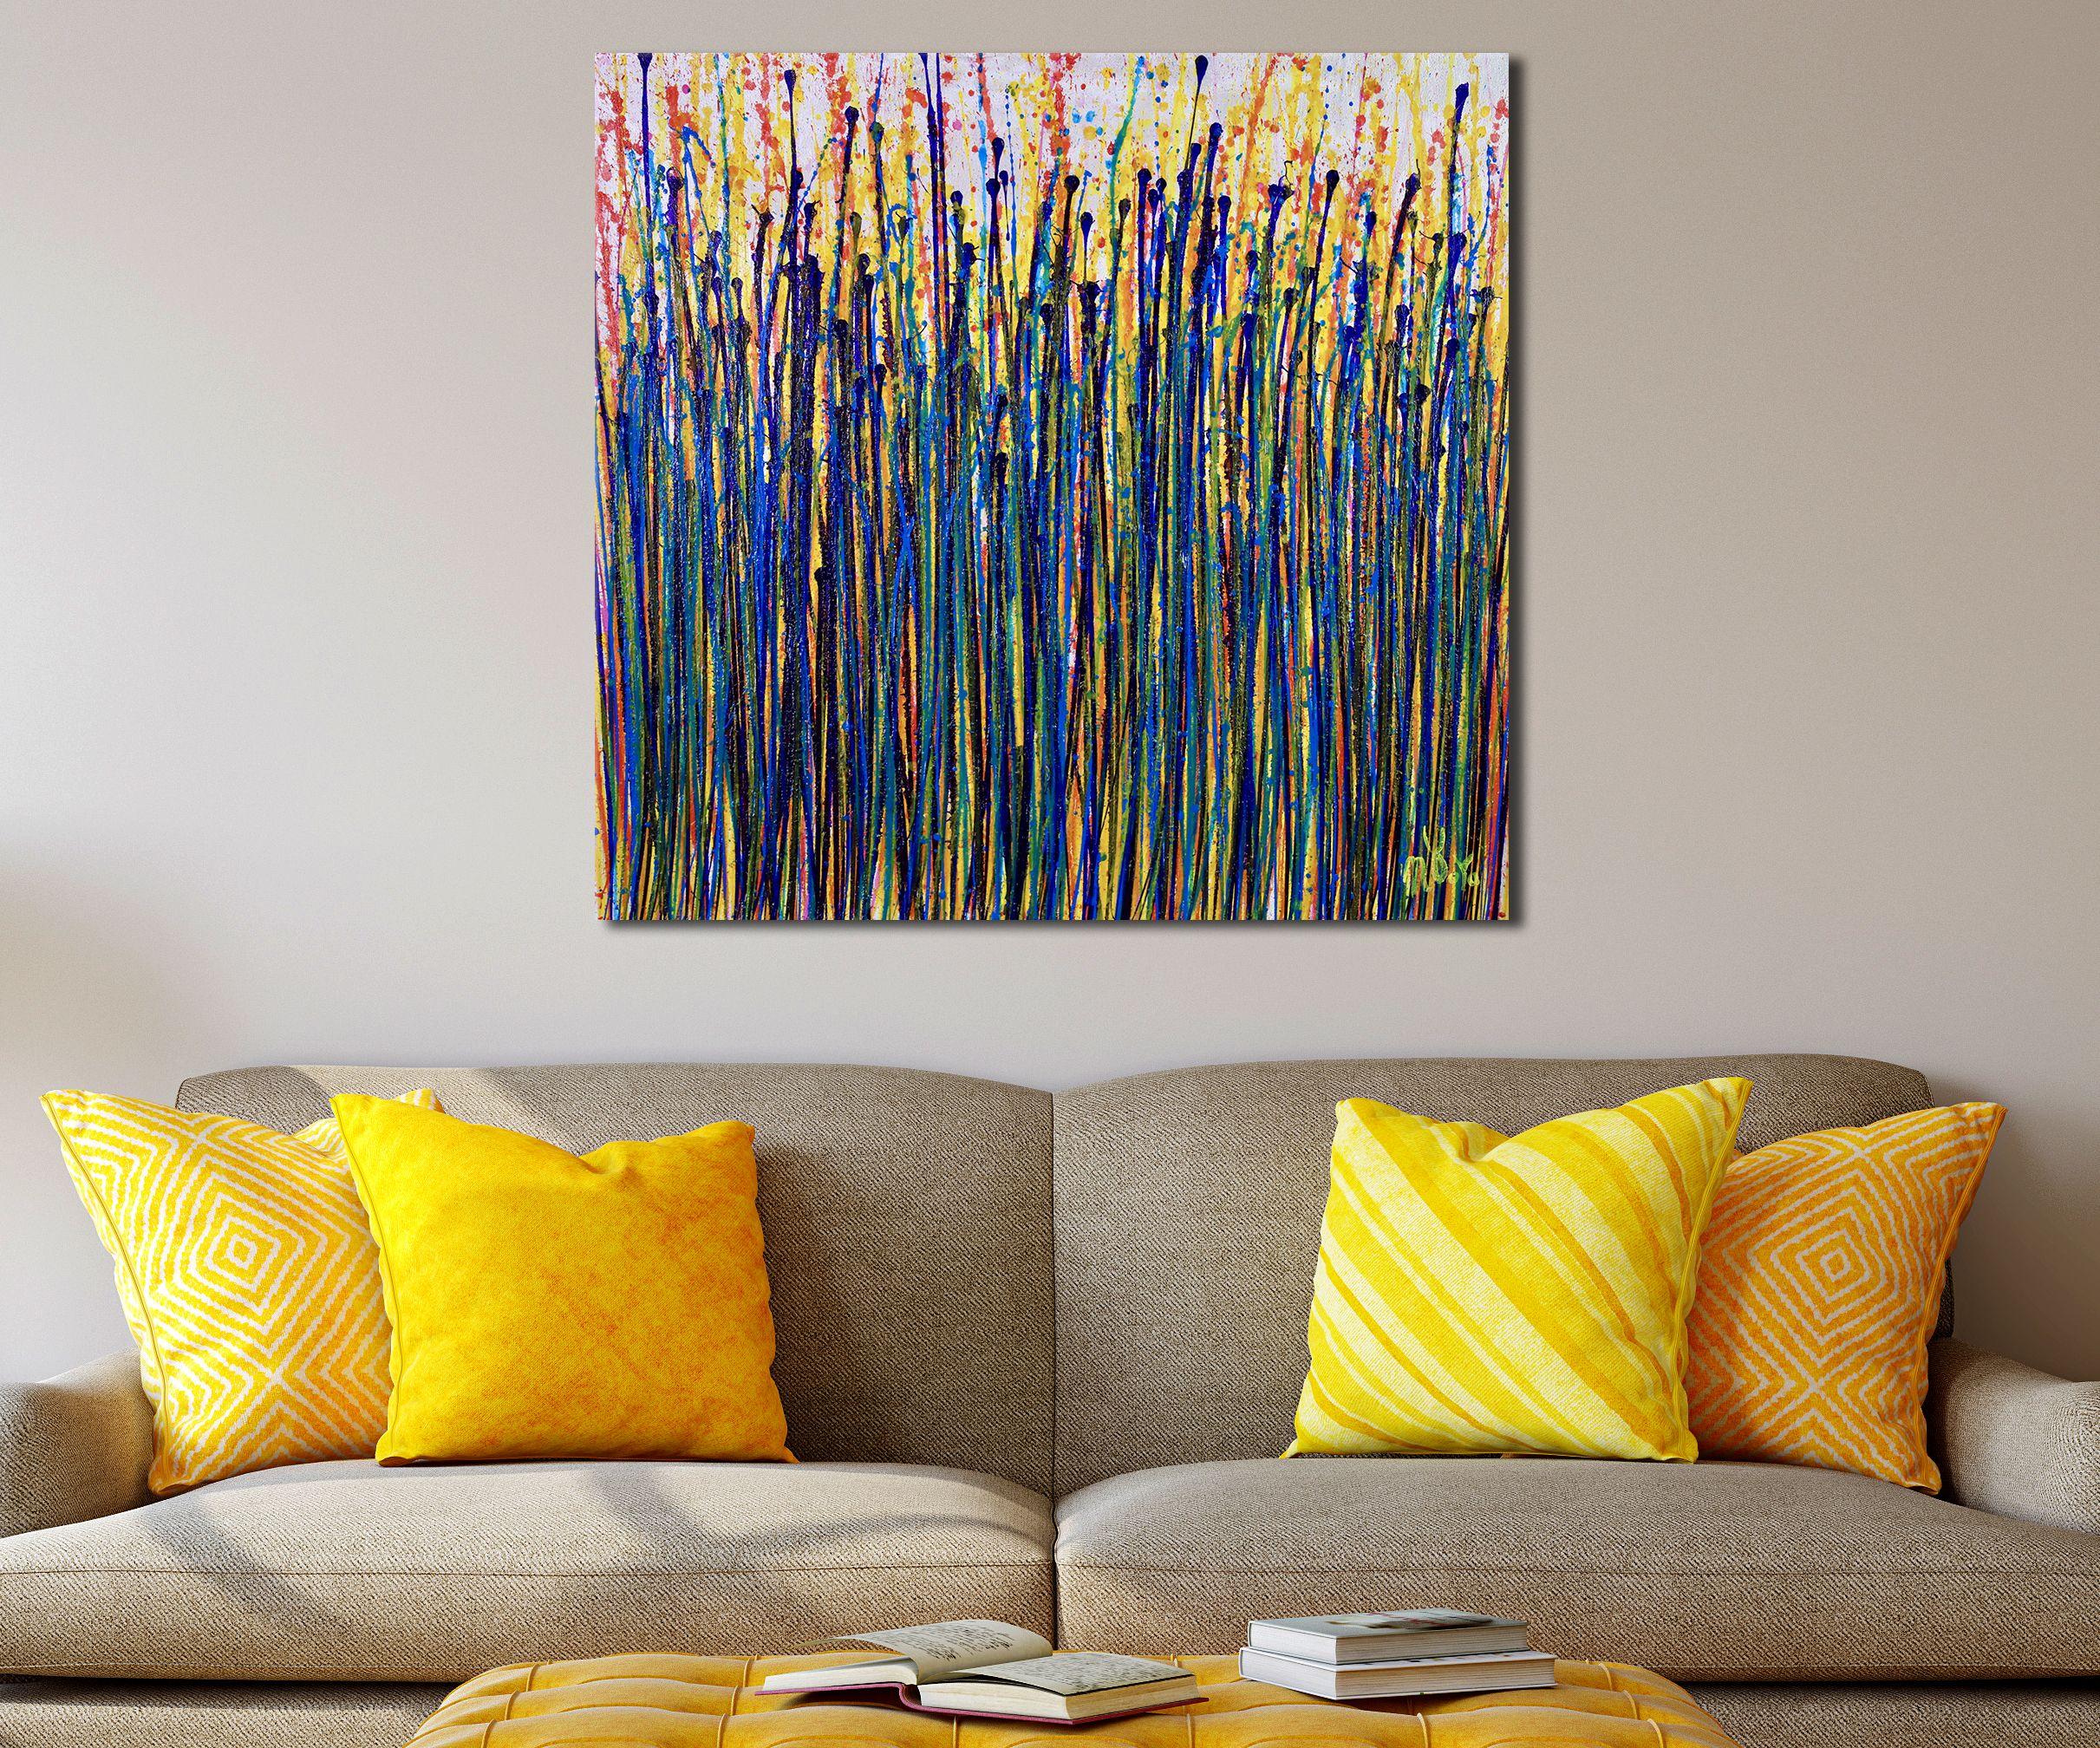 Vibrant expressionistic Inspired by nature abstract reflective silver background with burst of colors. Yellow, silver, blues, orange and iridescent purple. This artwork arrives in a tube, signed in front.    I include a certificate of authenticity